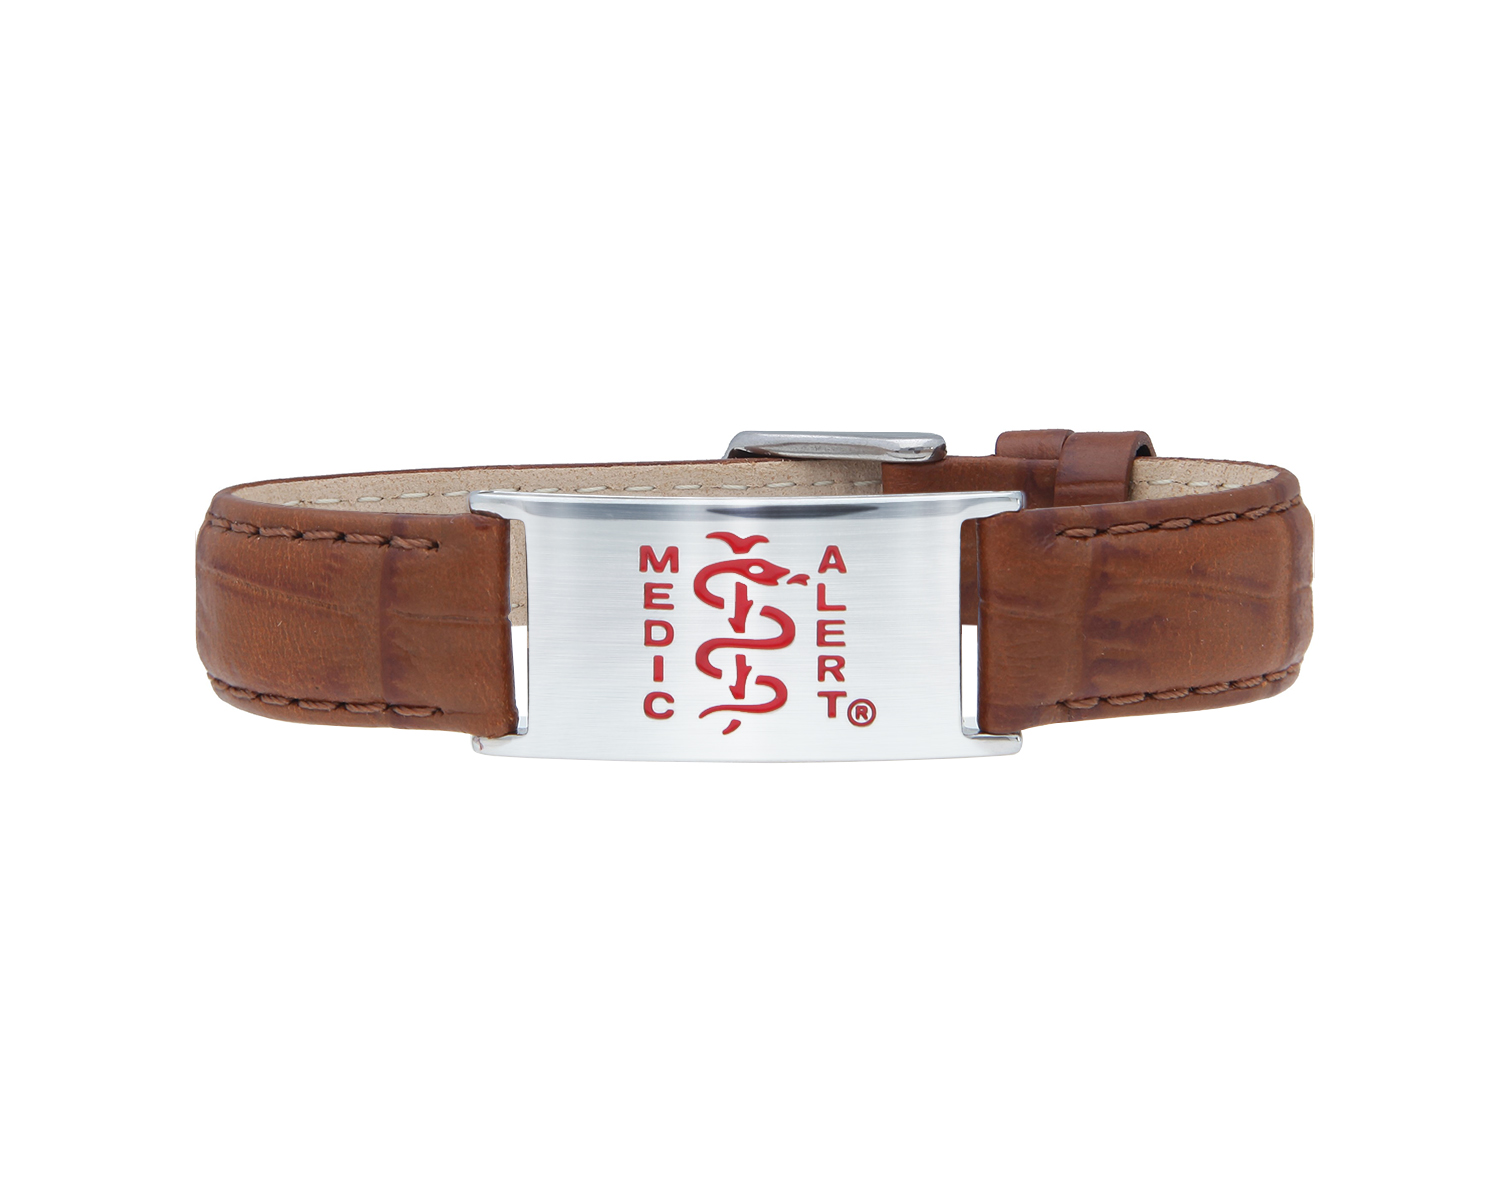 Brown leather bracelet with stainless steel shield disc with red MedicAlert logo which includes the universal medical sign of a snake wrapped around a rod